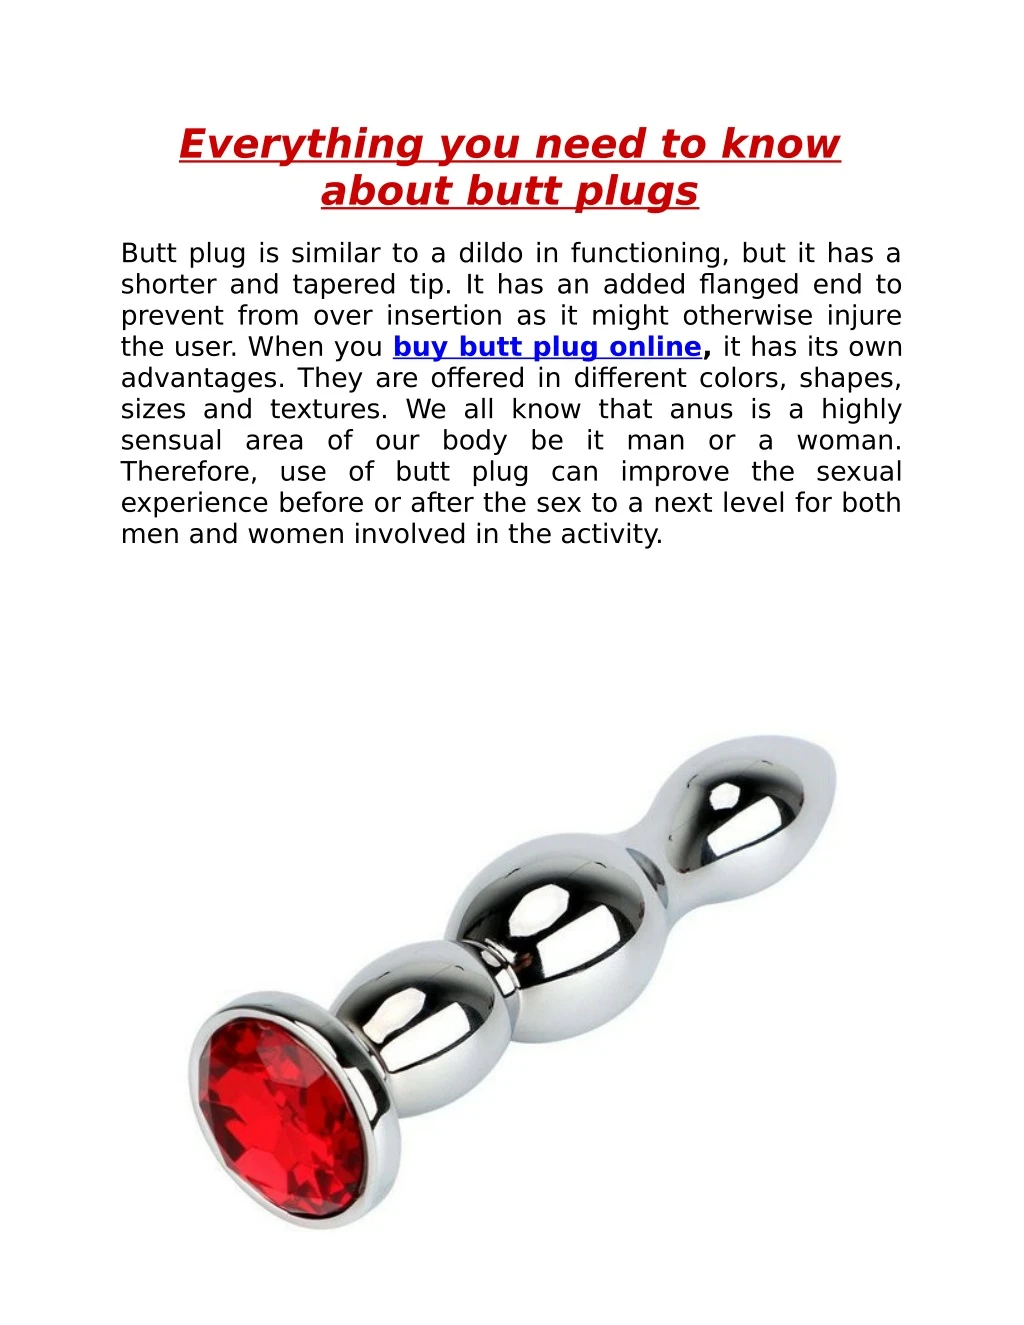 everything you need to know about butt plugs